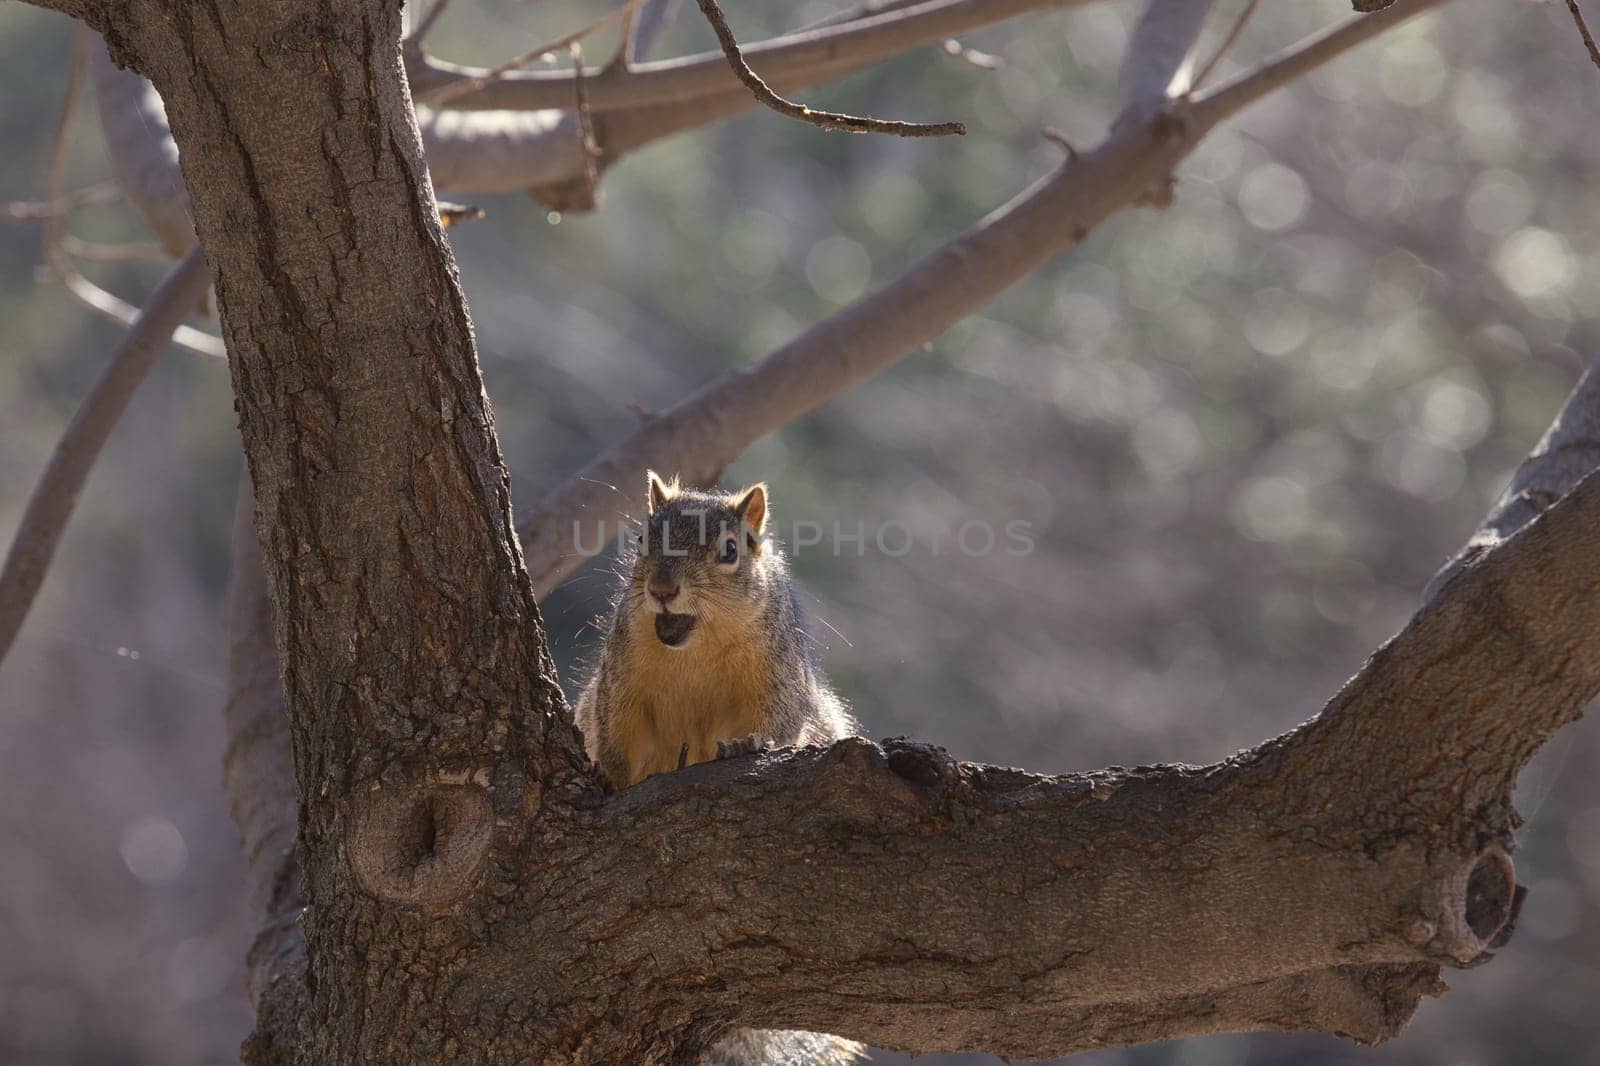 Evoke the playful charm of the American West with this delightful photograph featuring a Fox Squirrel in its natural Californian habitat. Captured in a moment of earnest curiosity, the squirrel's bushy tail and gleaming eyes embody the untamed beauty of the Golden State's diverse ecosystems. The photo's composition expertly balances detail and context, allowing the viewer to appreciate both the intricacies of the squirrel's fur and the surrounding woodland. Perfect for adding a touch of whimsy, warmth, and natural beauty to any space